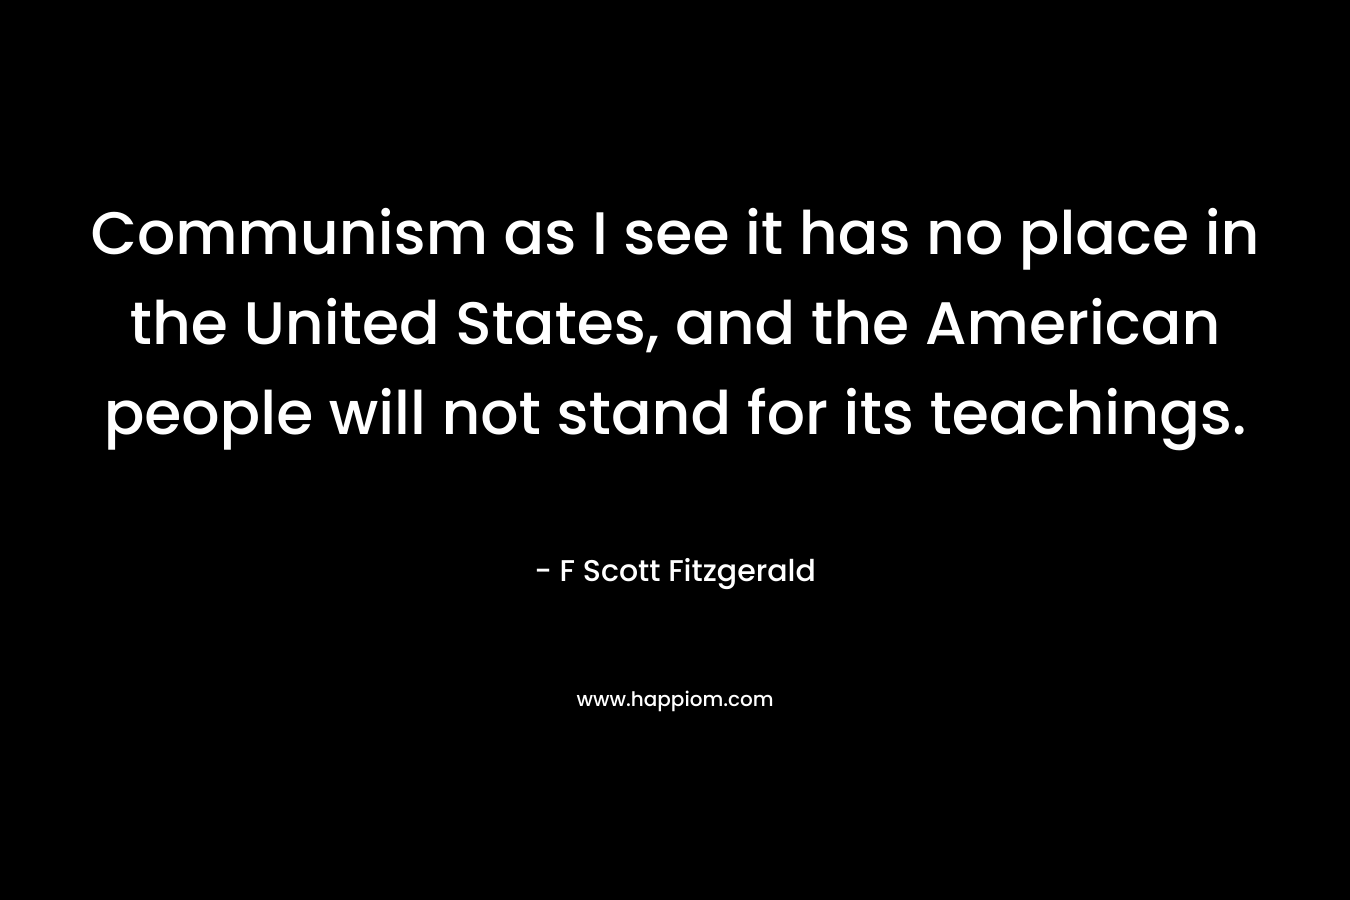 Communism as I see it has no place in the United States, and the American people will not stand for its teachings.